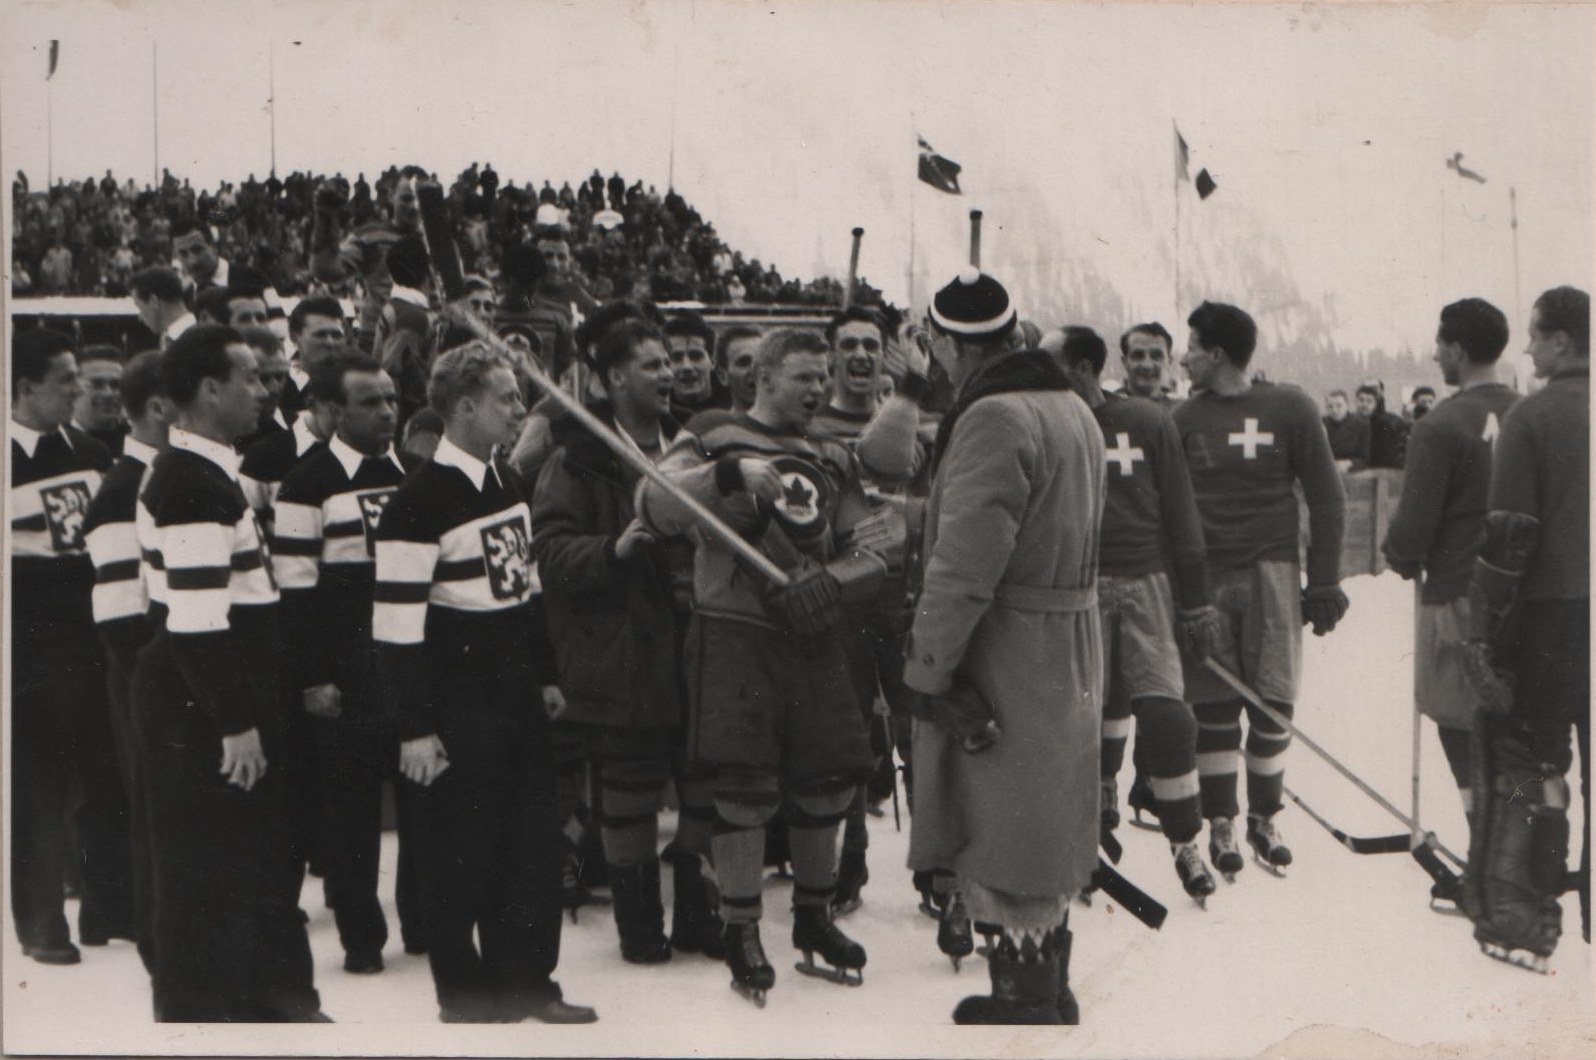 Photo: Gold, Silver, Bronze 1948 Olympic Hockey Team Winners Mix after Medal Ceremonies